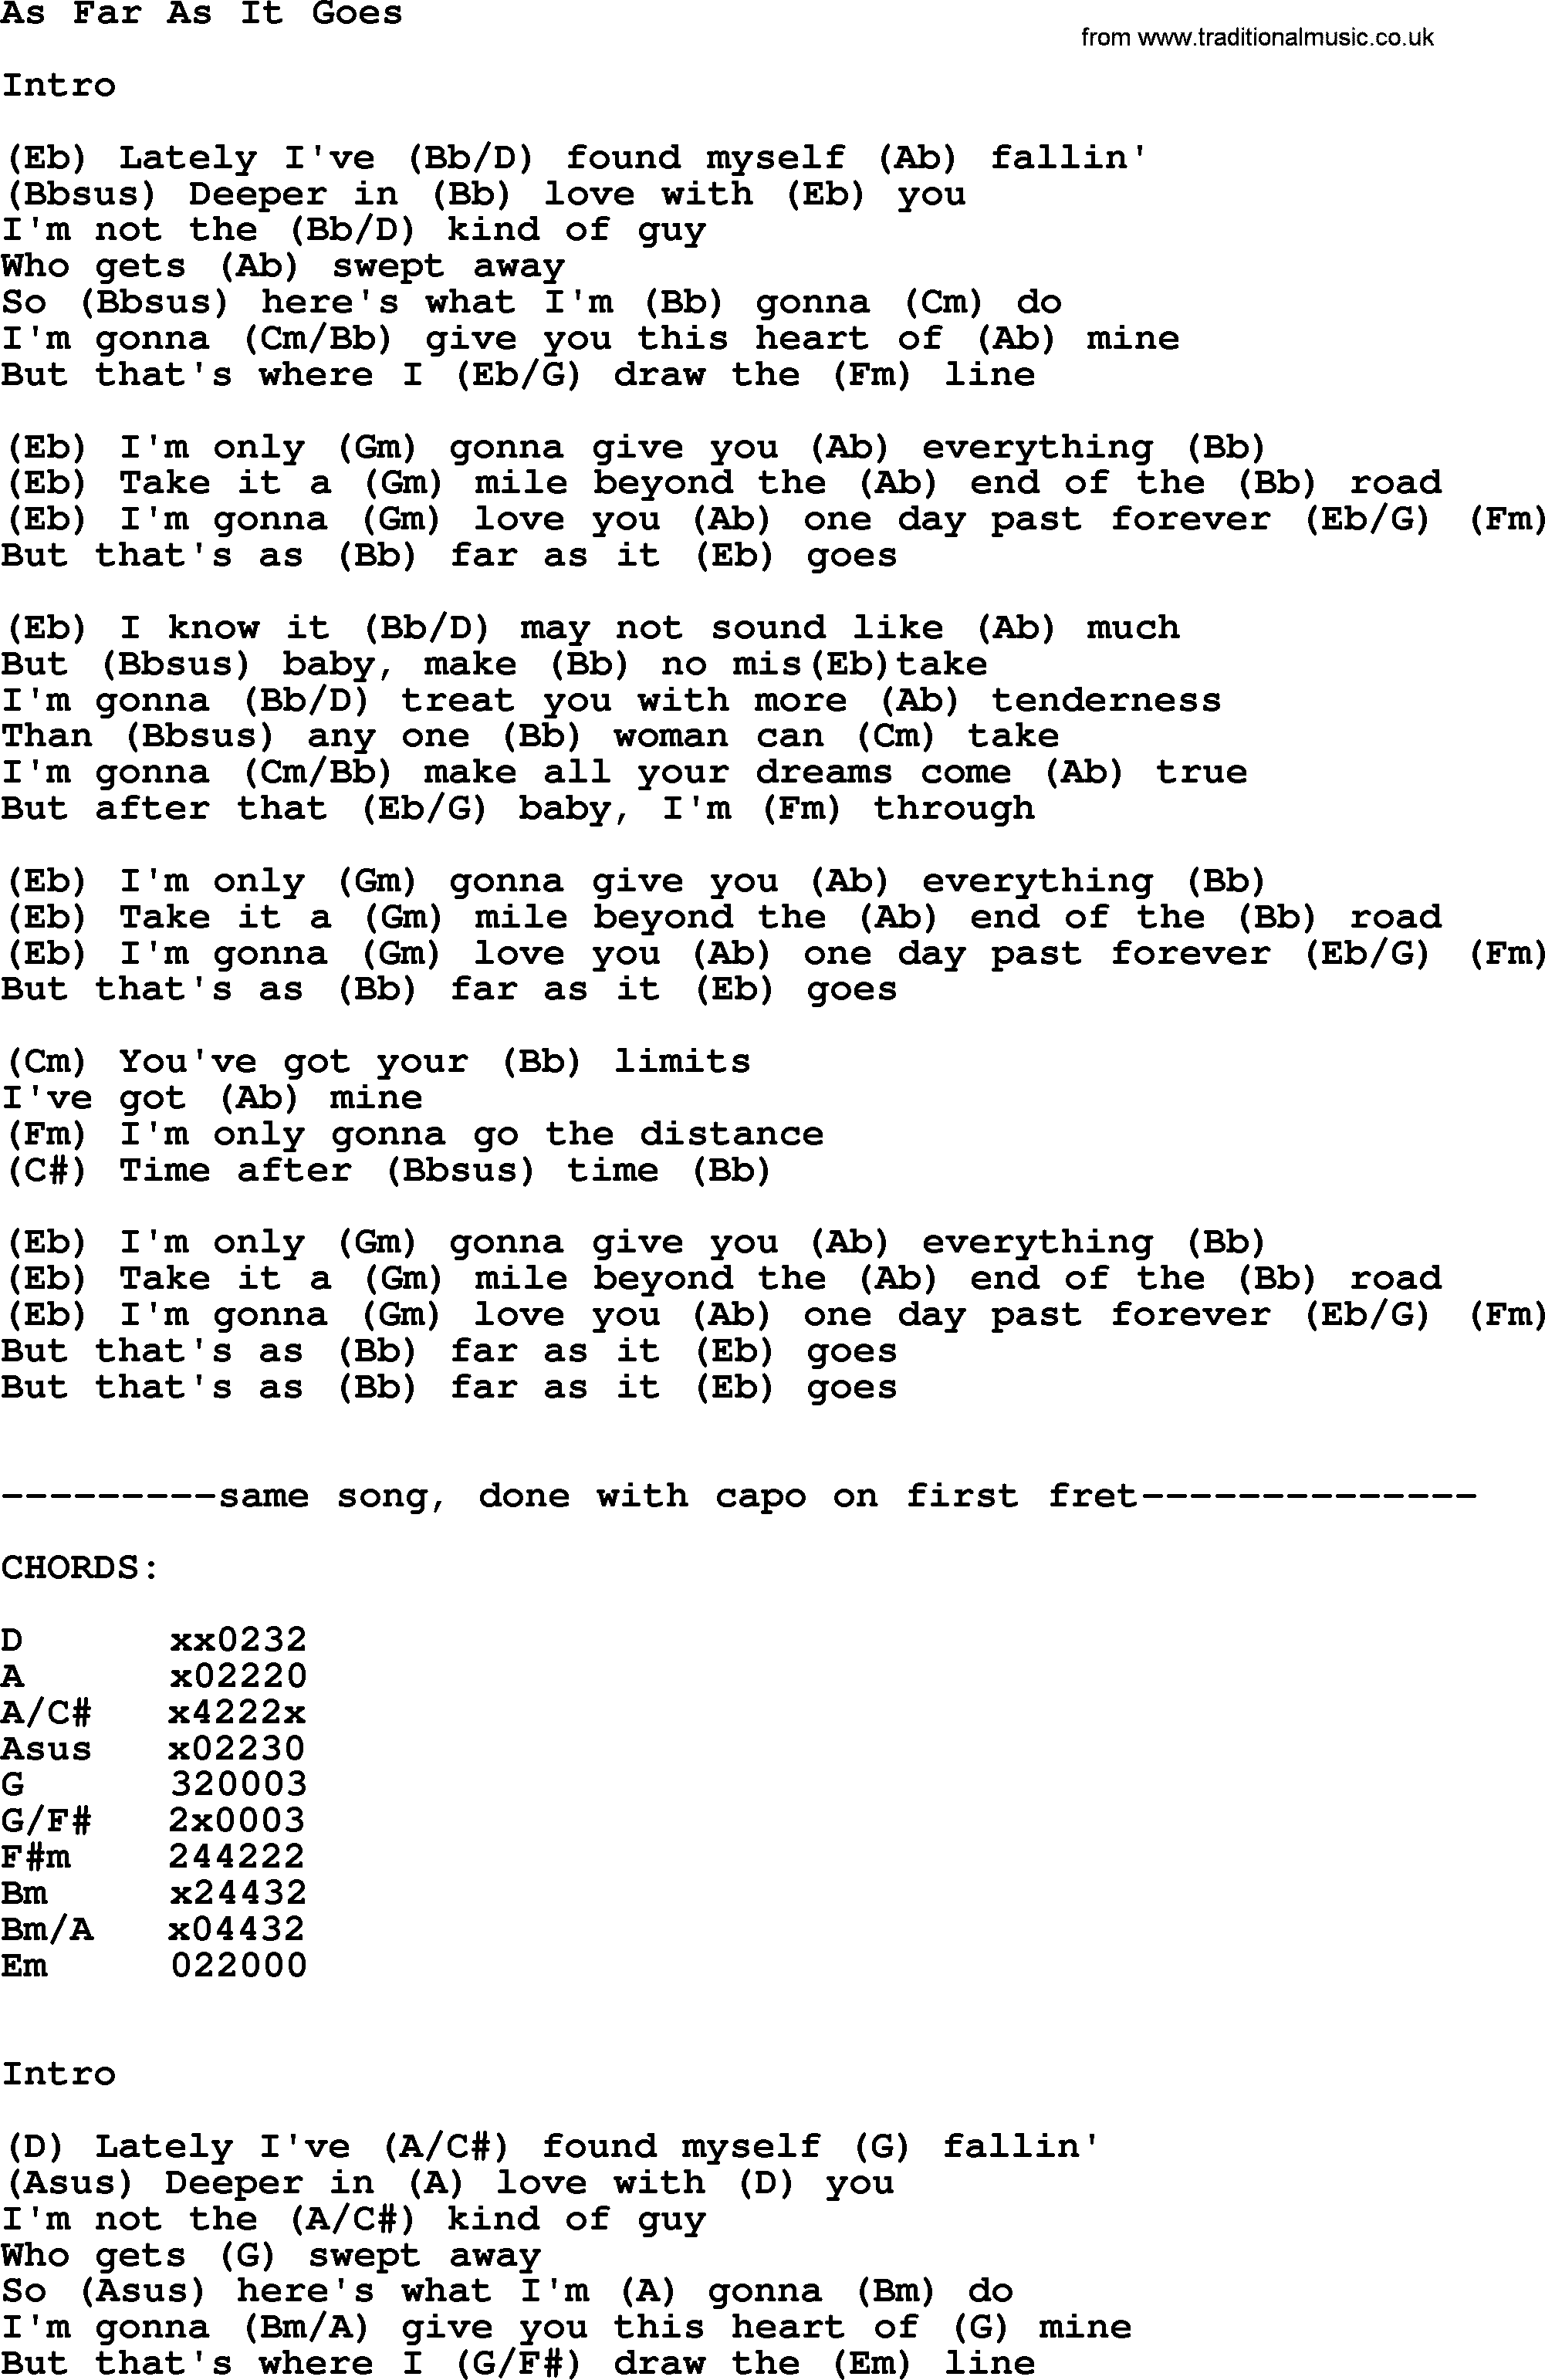 George Strait song: As Far As It Goes, lyrics and chords